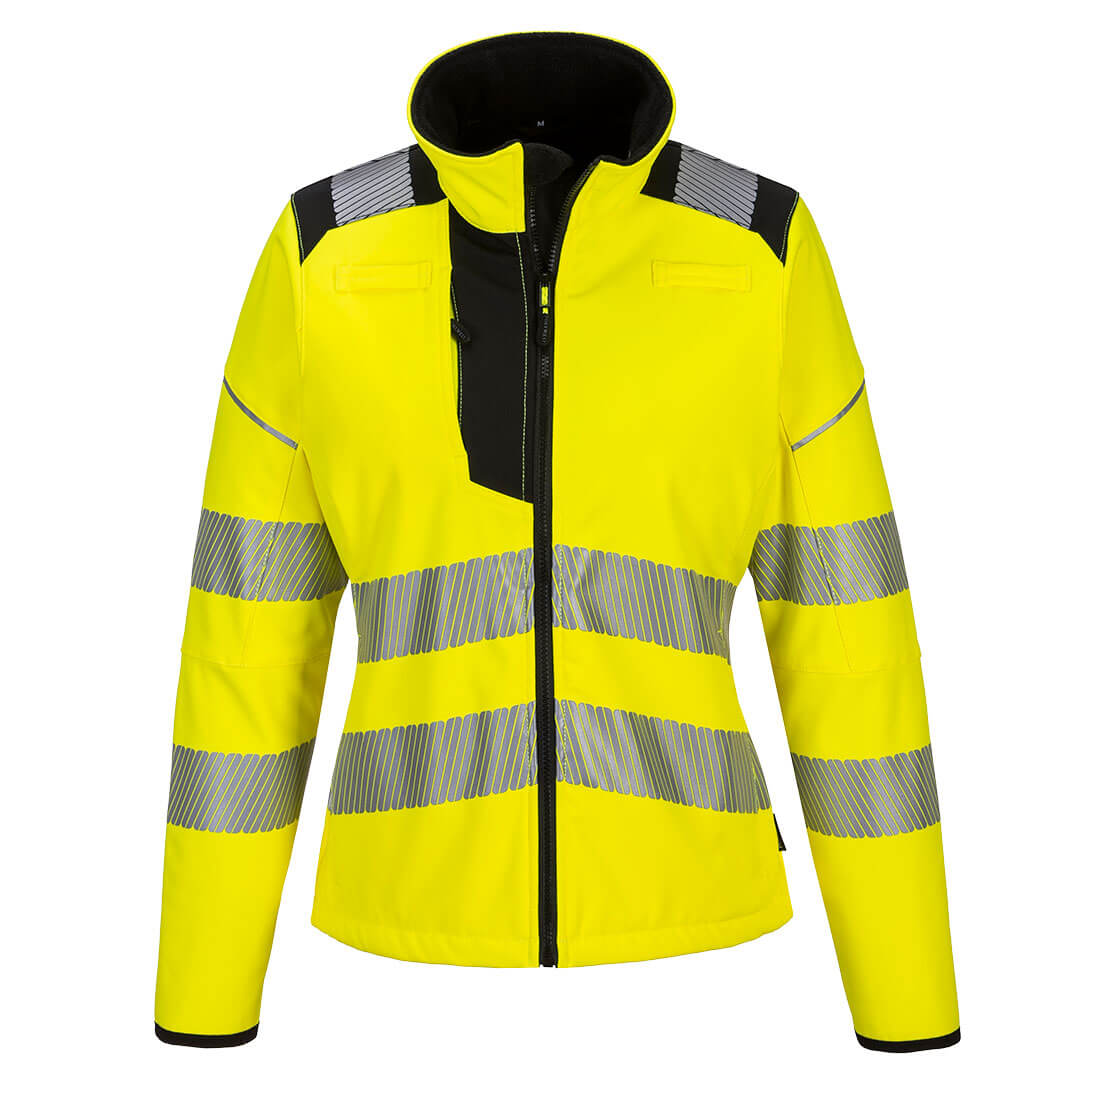 ANSI Class 2 High Visibility Safety Jackets